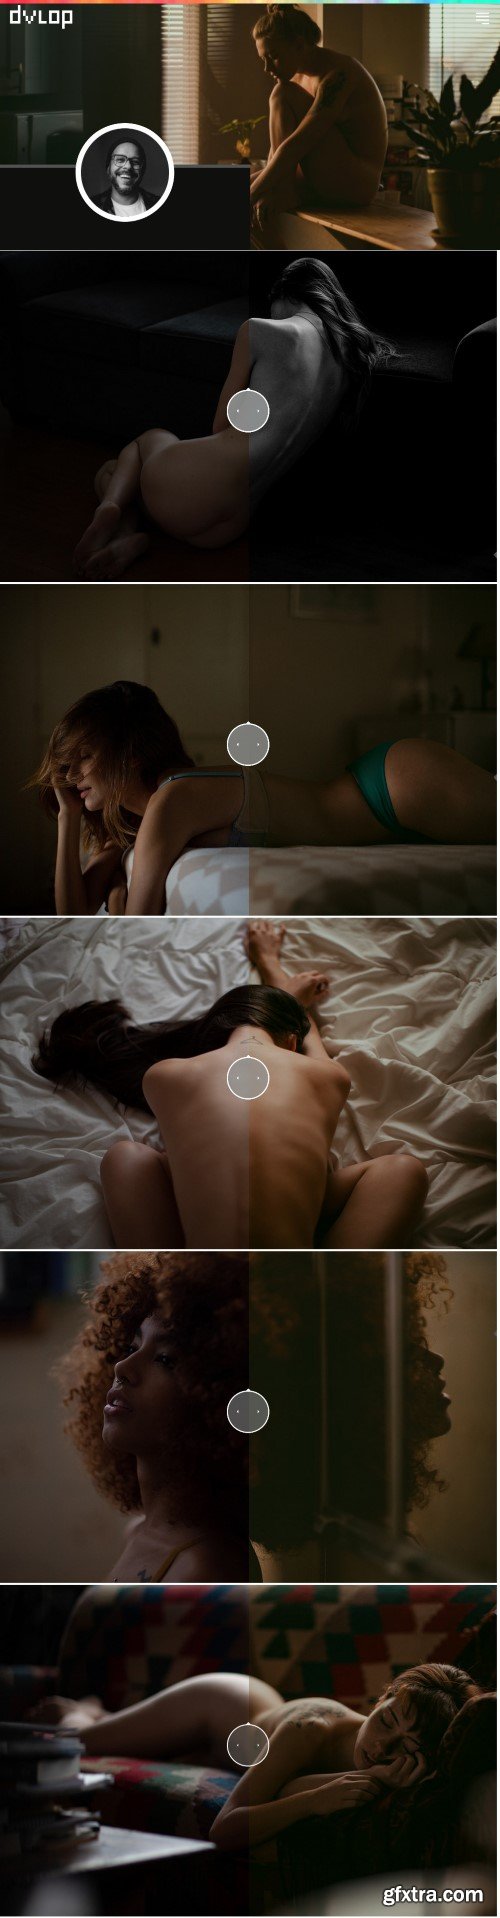 Dvlop - Joao Guedes - Diaries Presets